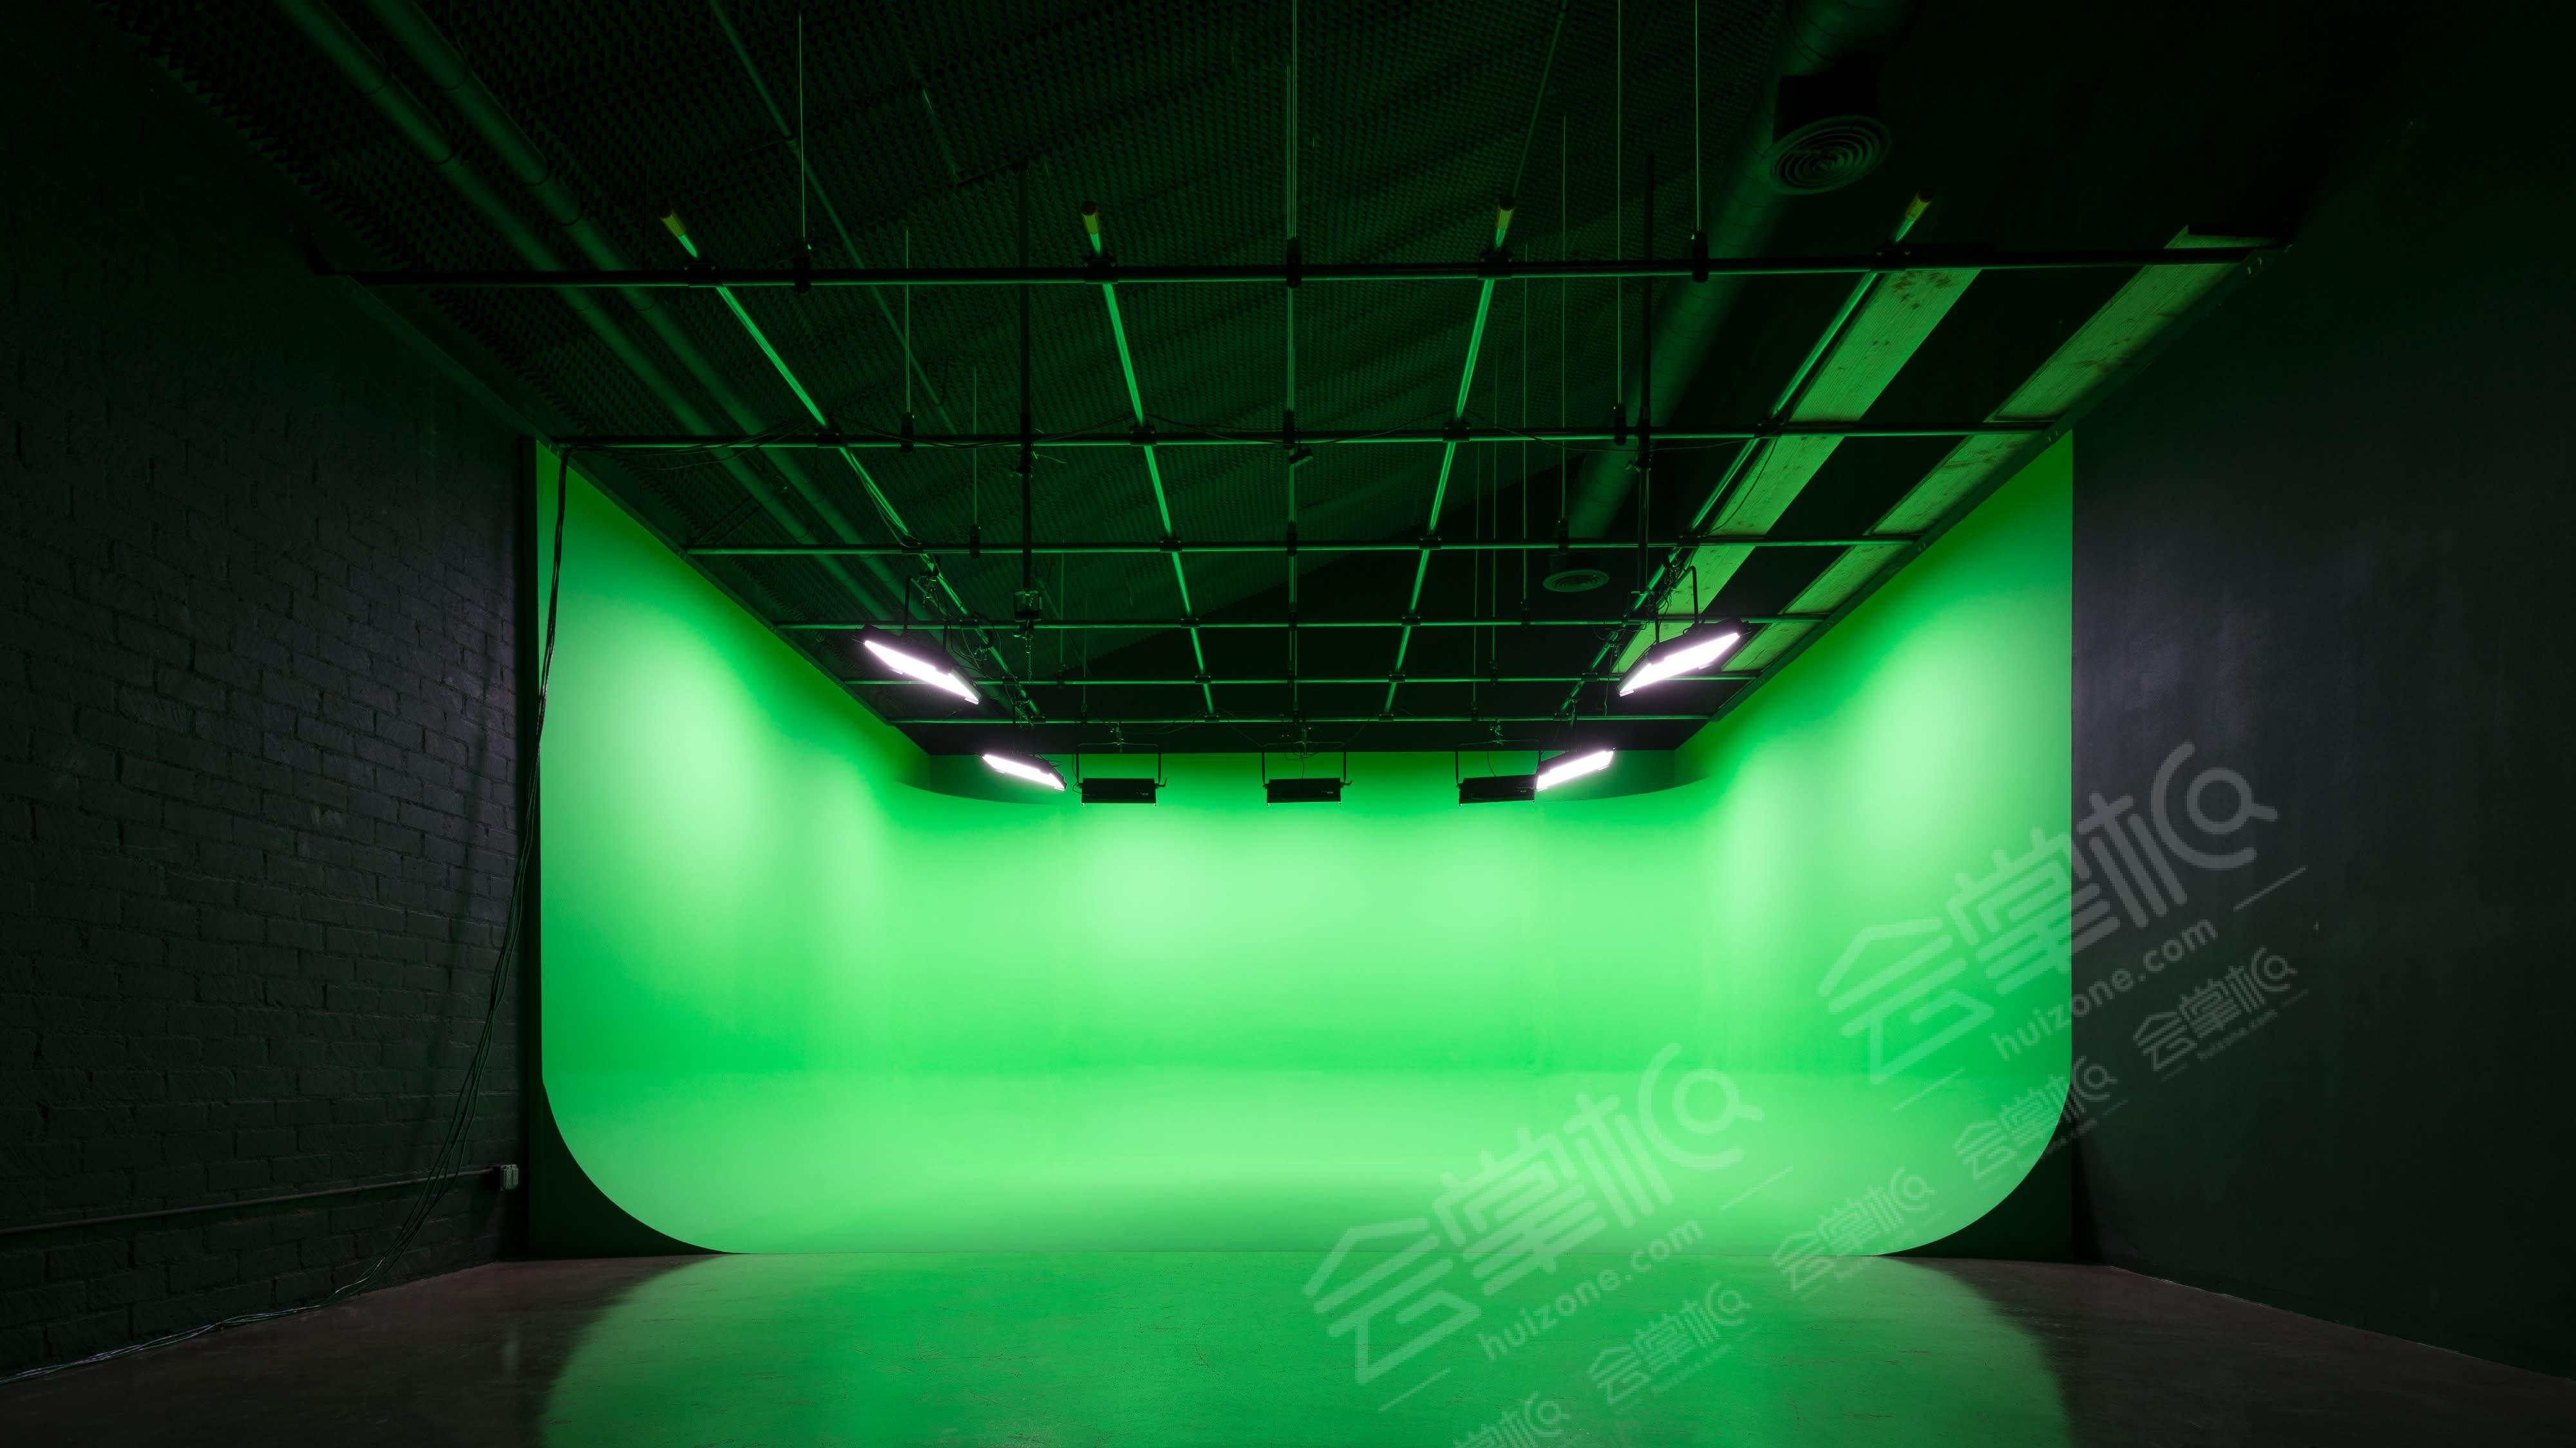 Professional Cyclorama Production Studio on the Westside in Los Angeles